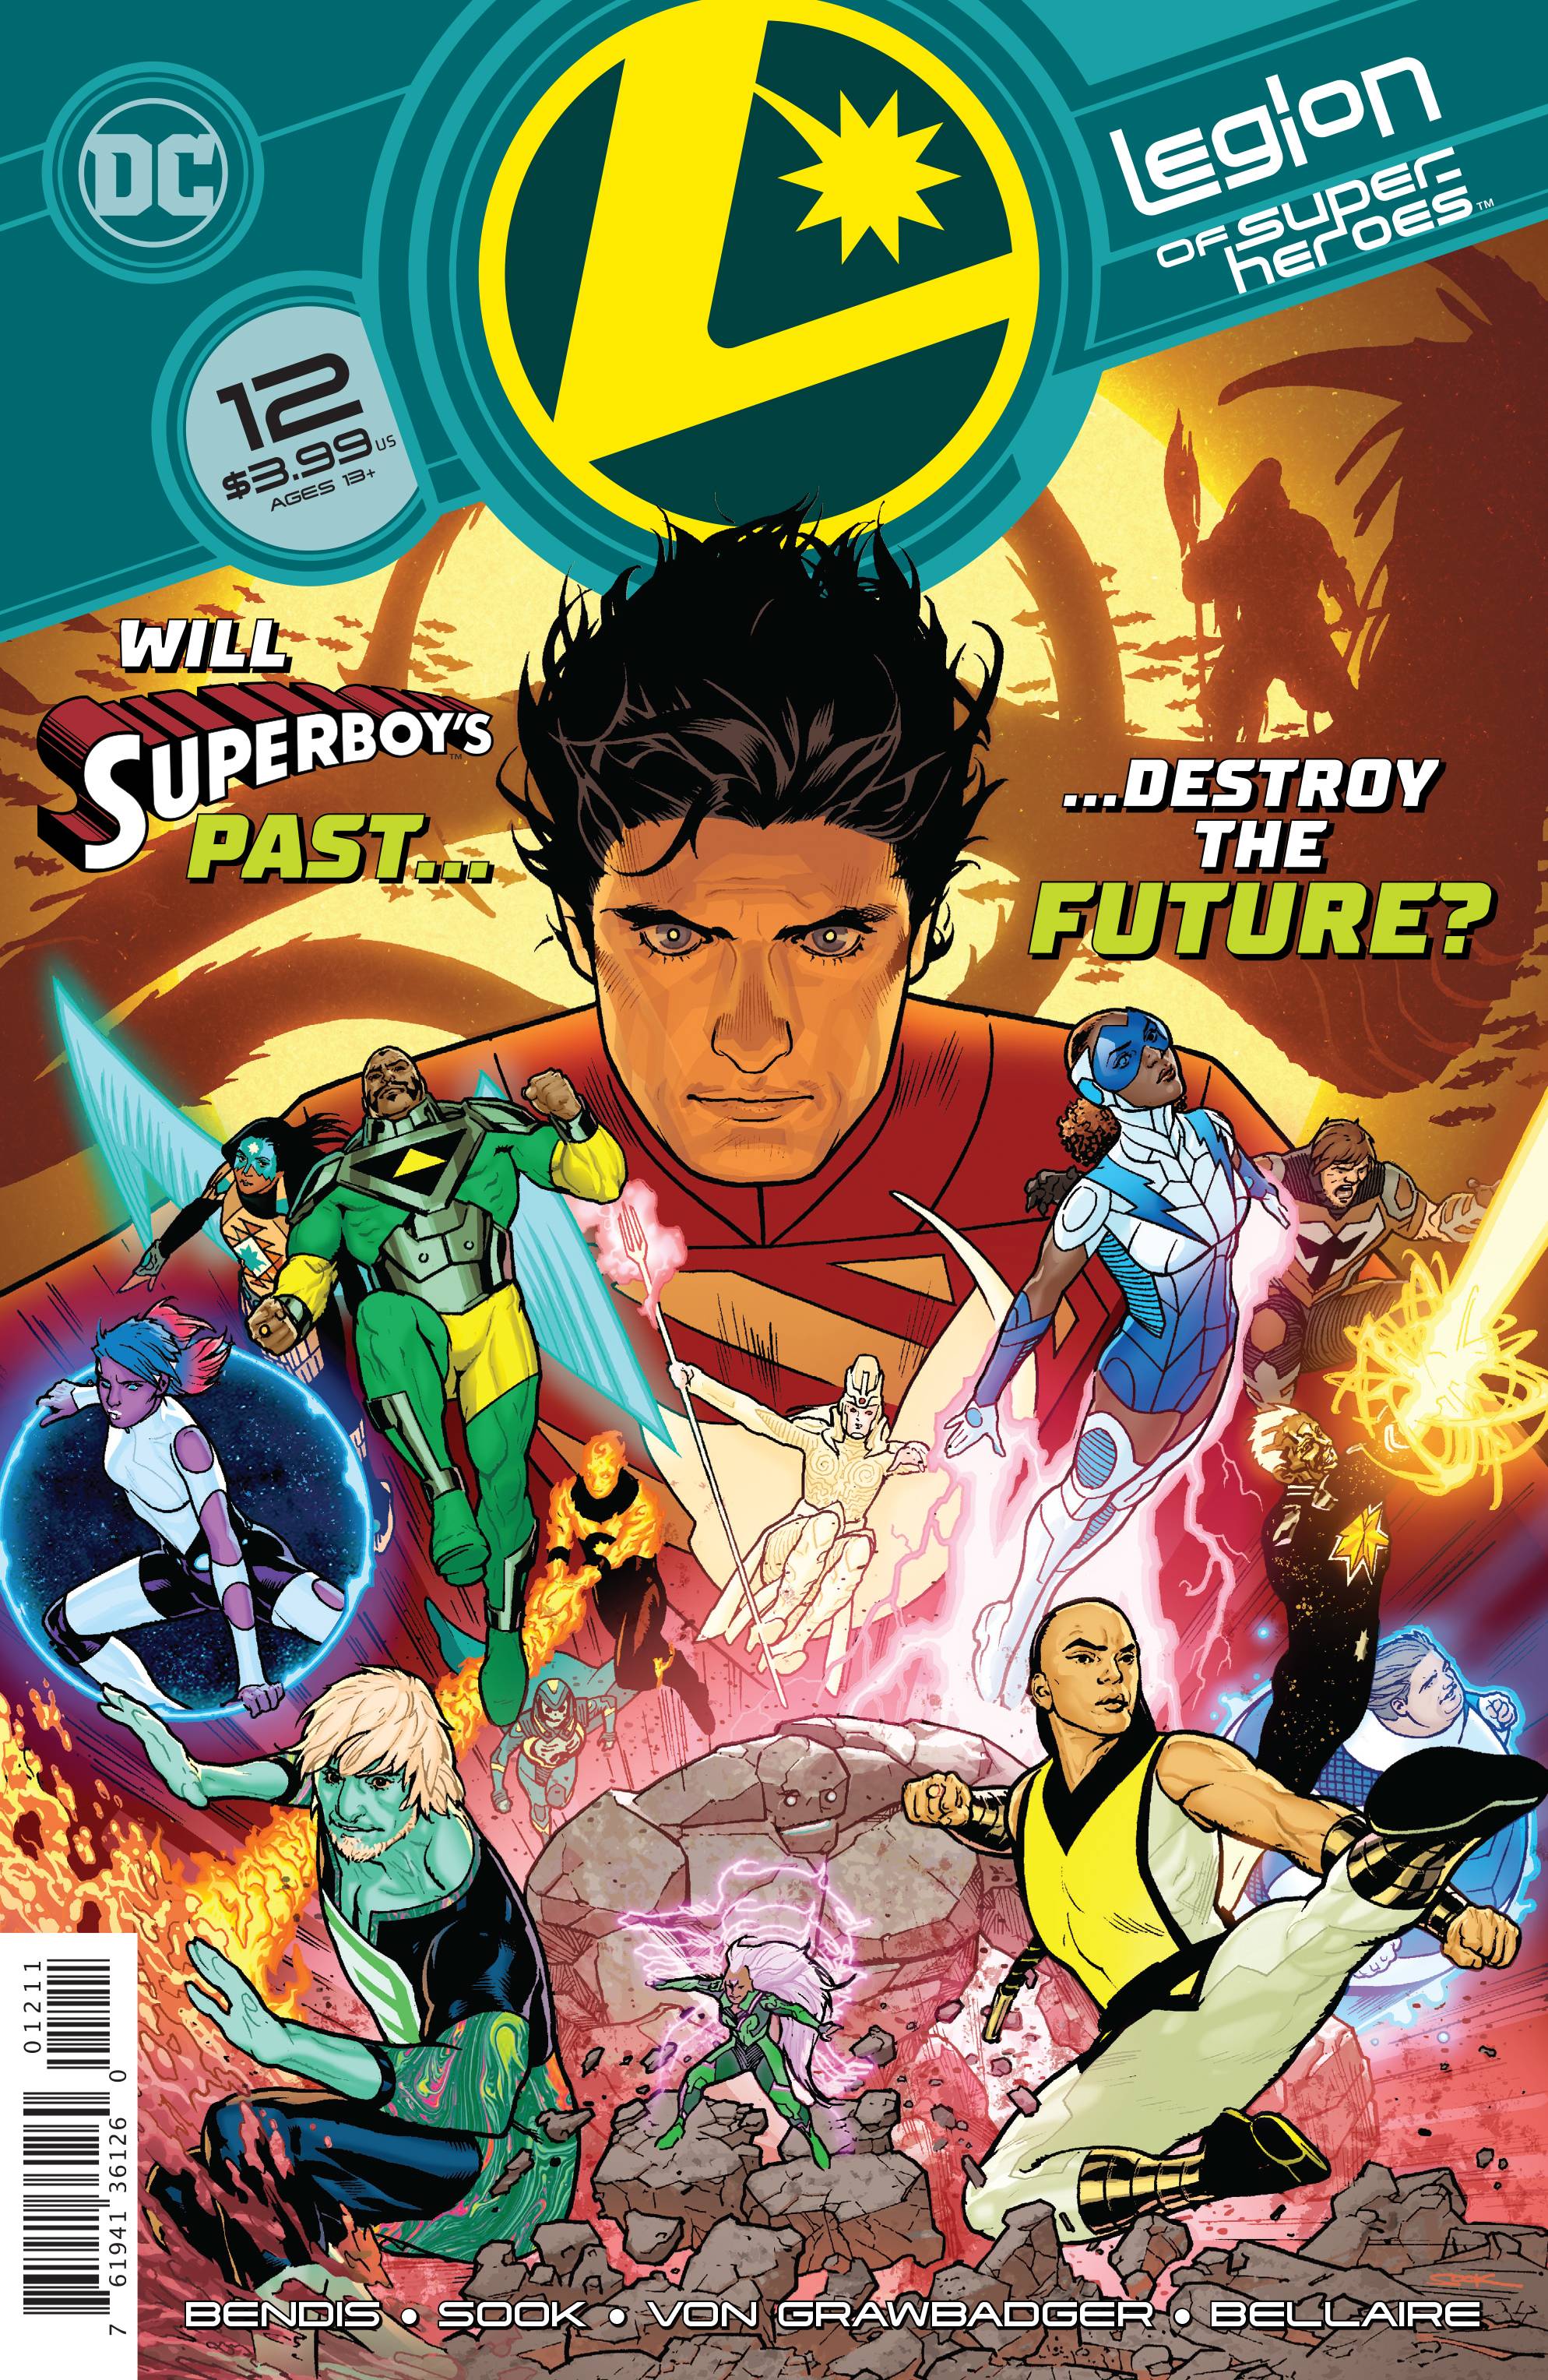 OCT207113 LEGION OF SUPER HEROES 12 Previews World